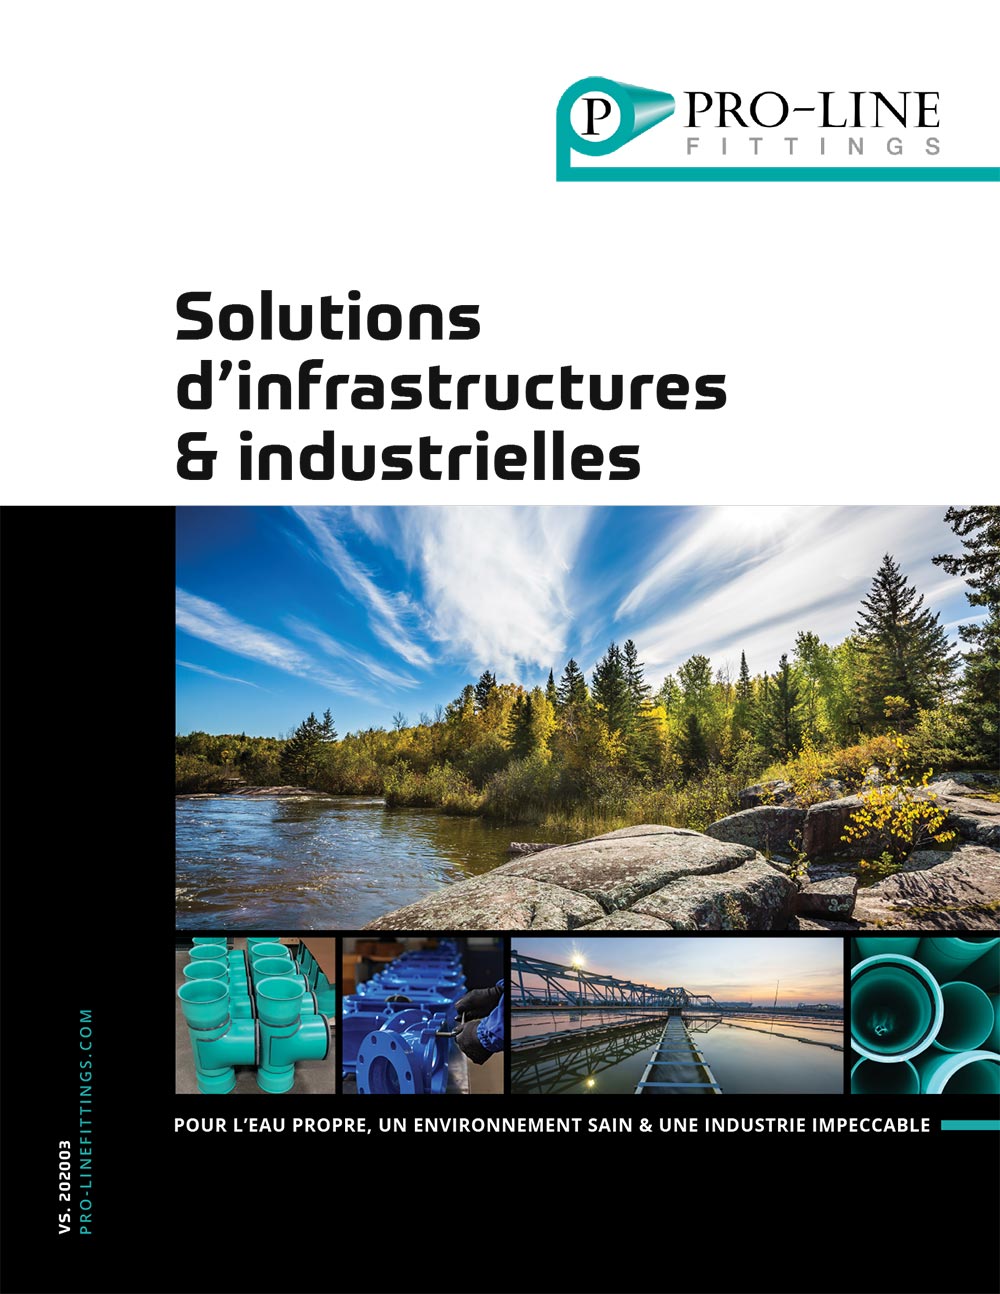 Infrastructure & Industrial Solutions